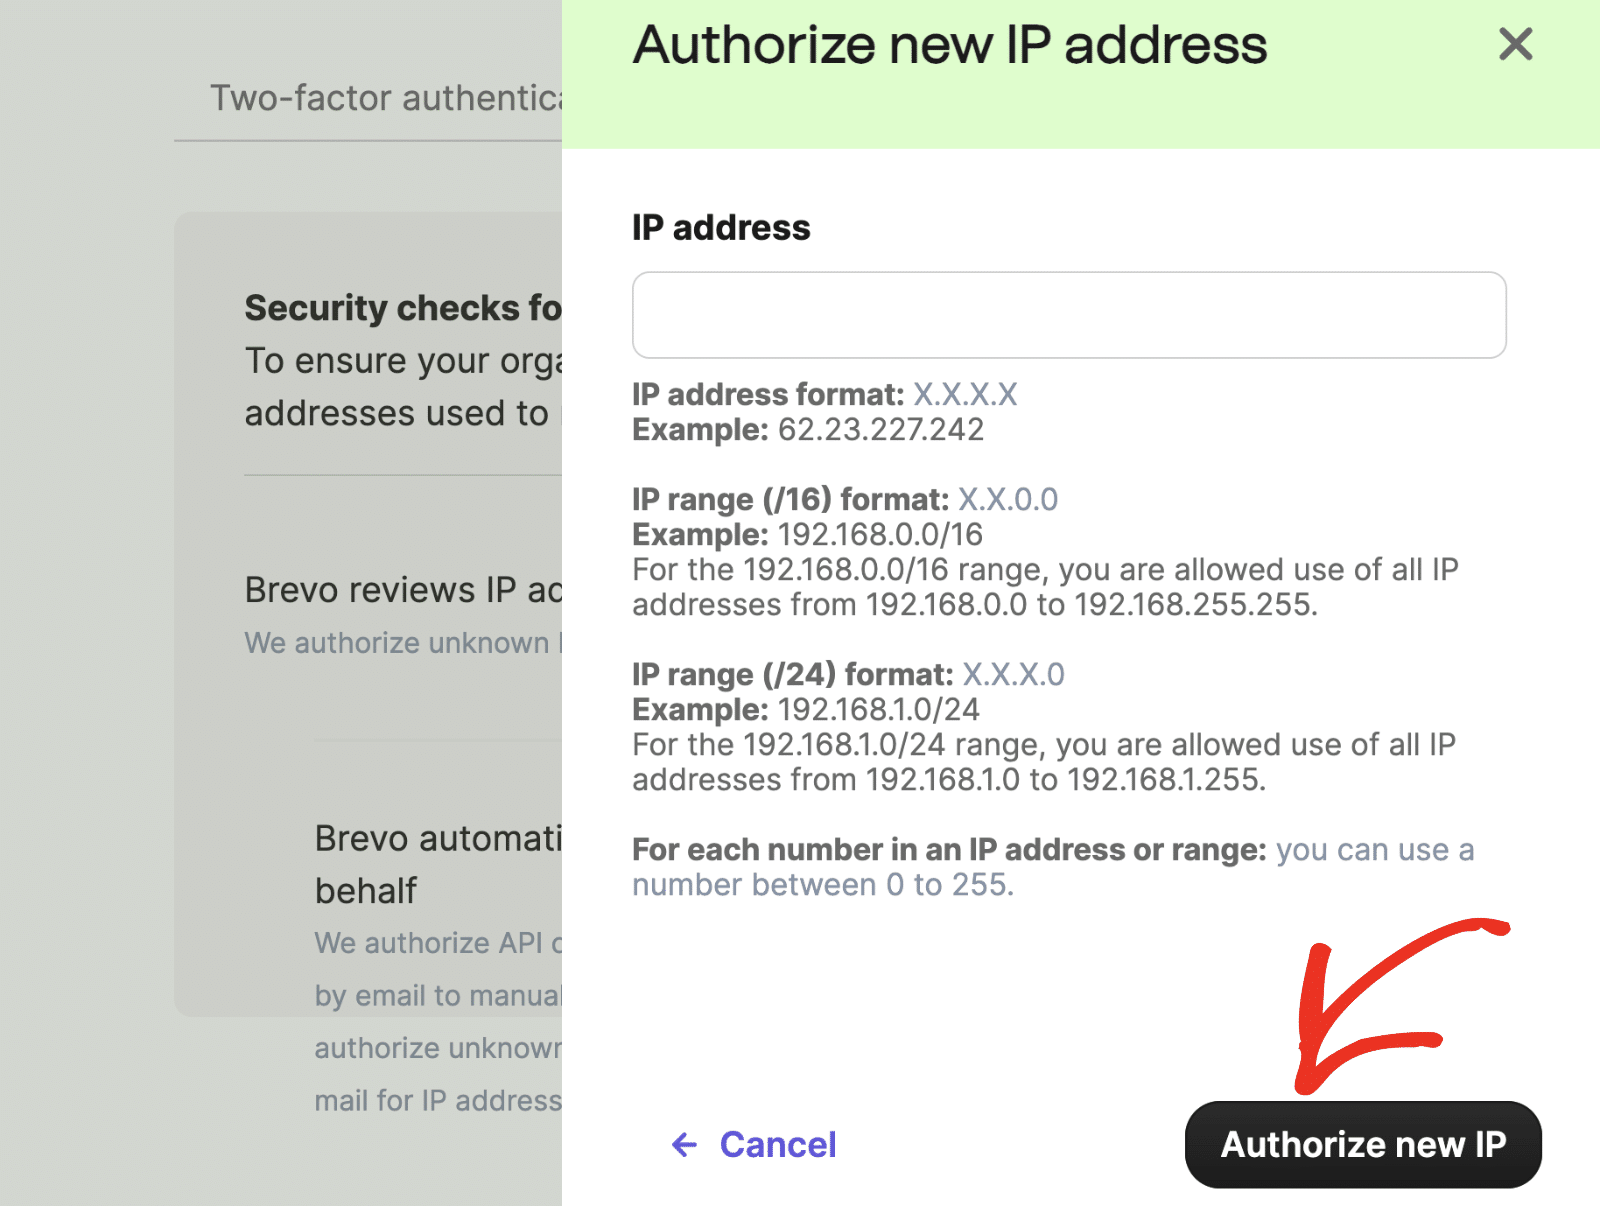 Click the Authorize new IP button